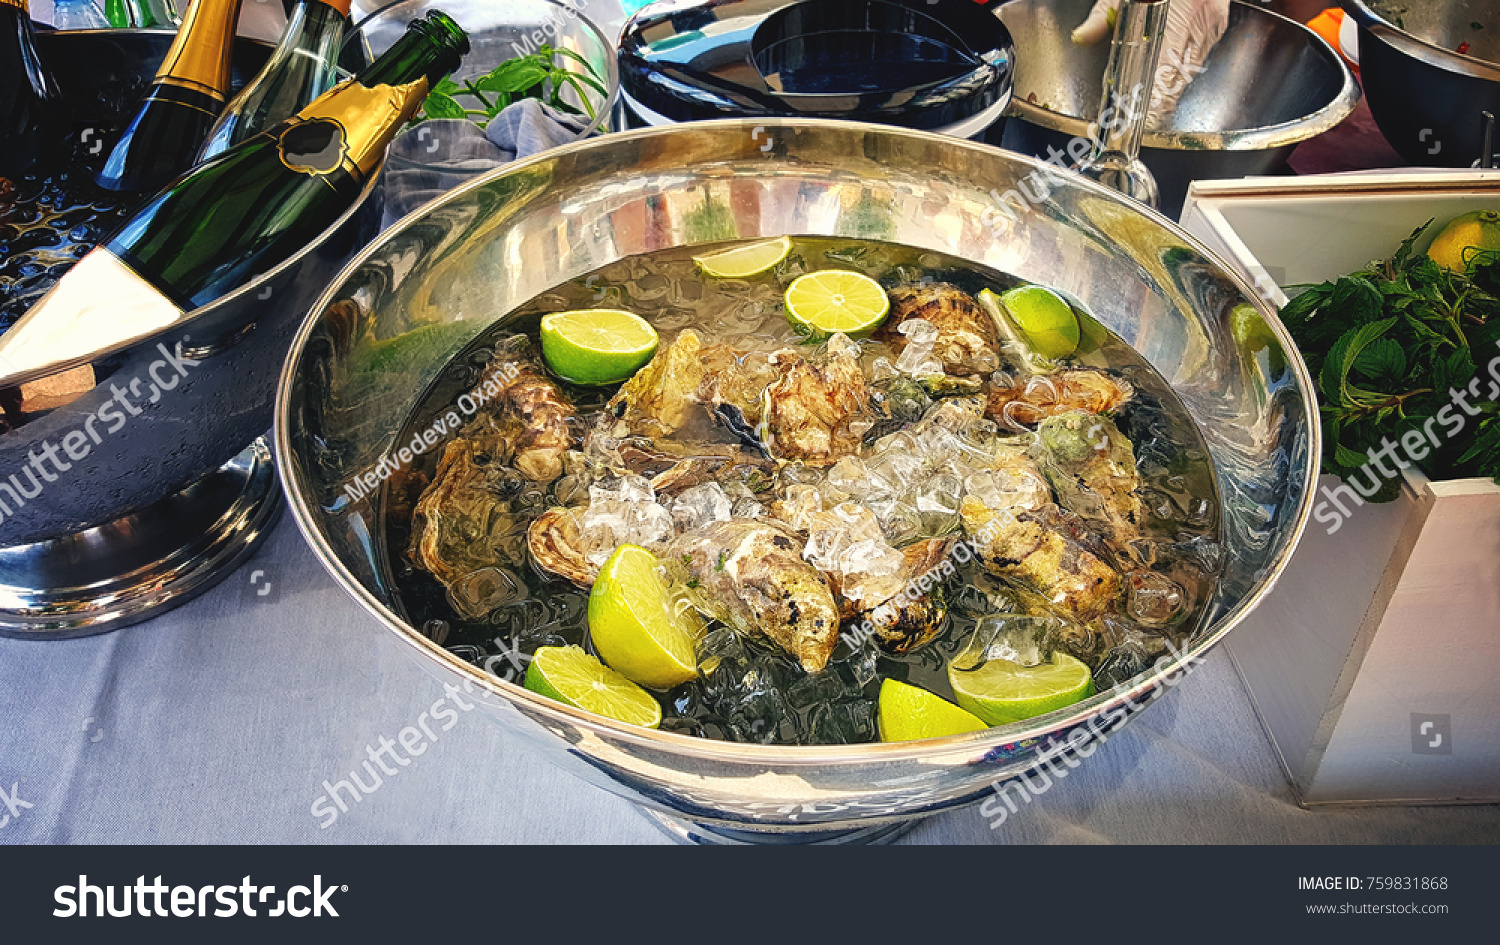 A large platter with delikatesnye oysters on ice with lime served with champagne and herbs. Serving. The horizontal frame. #759831868